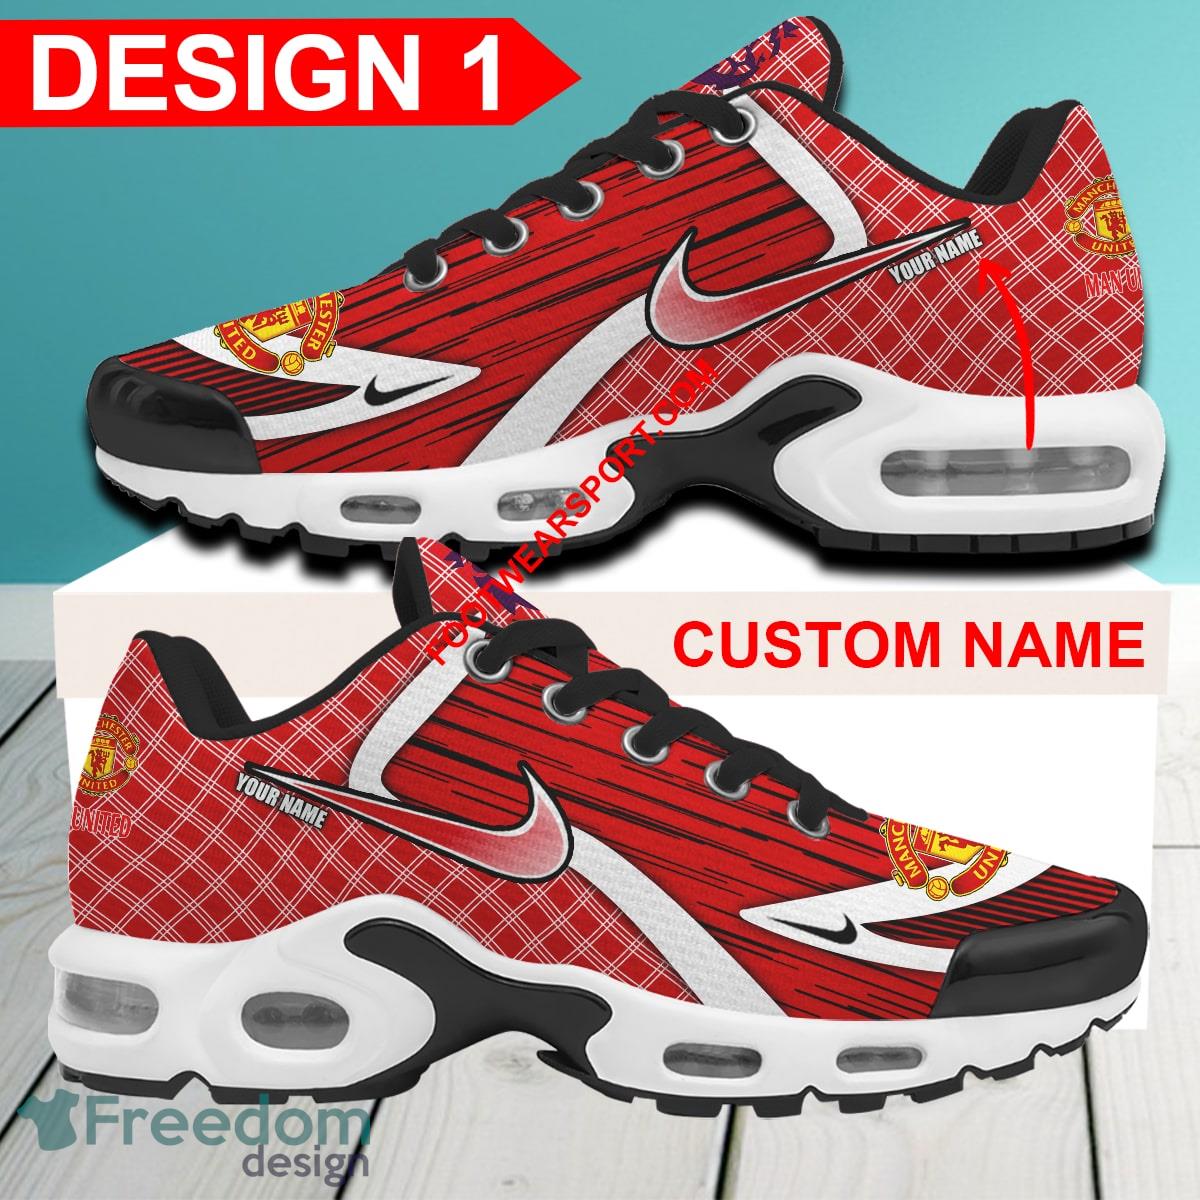 Custom Name EPL Manchester United Air Cushion Sport Shoes TN Sneakers AOP For Men Women - EPL Manchester United Air Cushion Sport Shoes Style 1 TN Sneakers